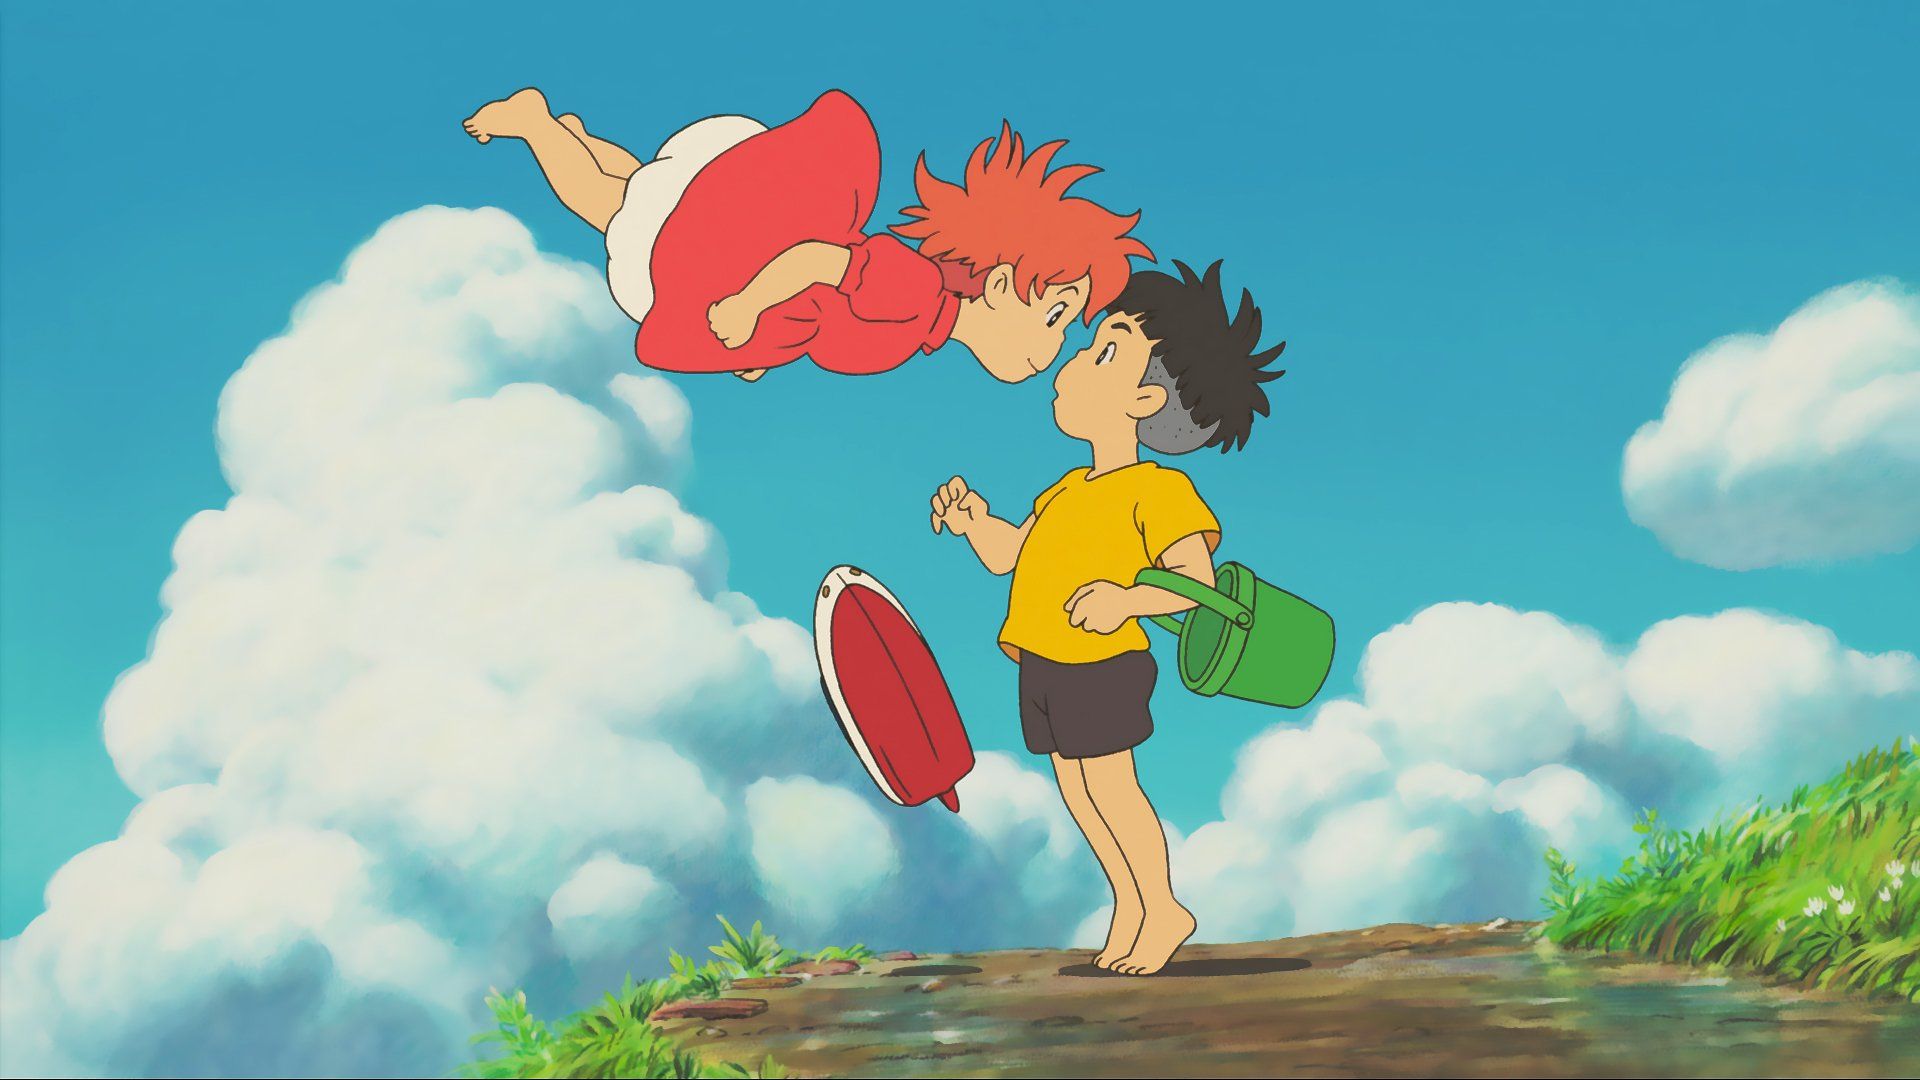 Ponyo - Limited Edition Collectible SteelBook